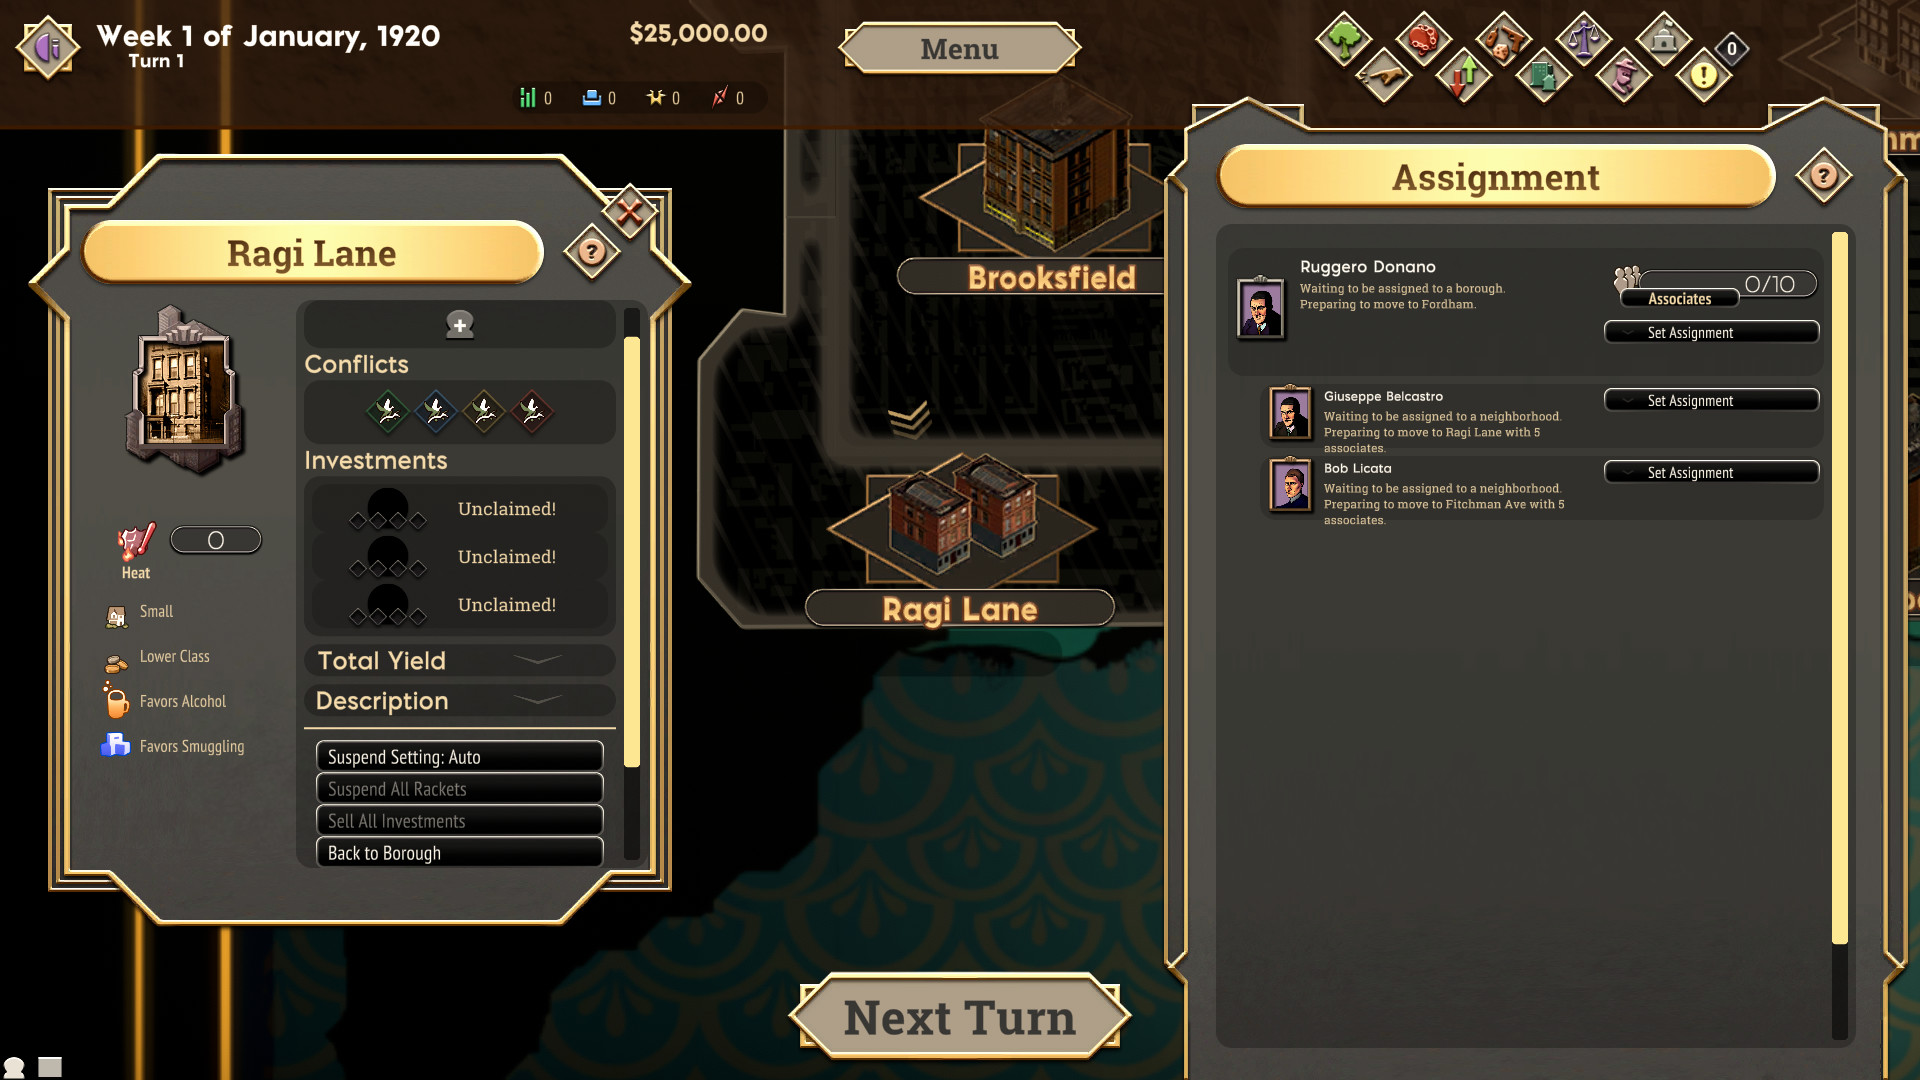 The Commission 1920: Organized Crime Grand Strategy screenshot